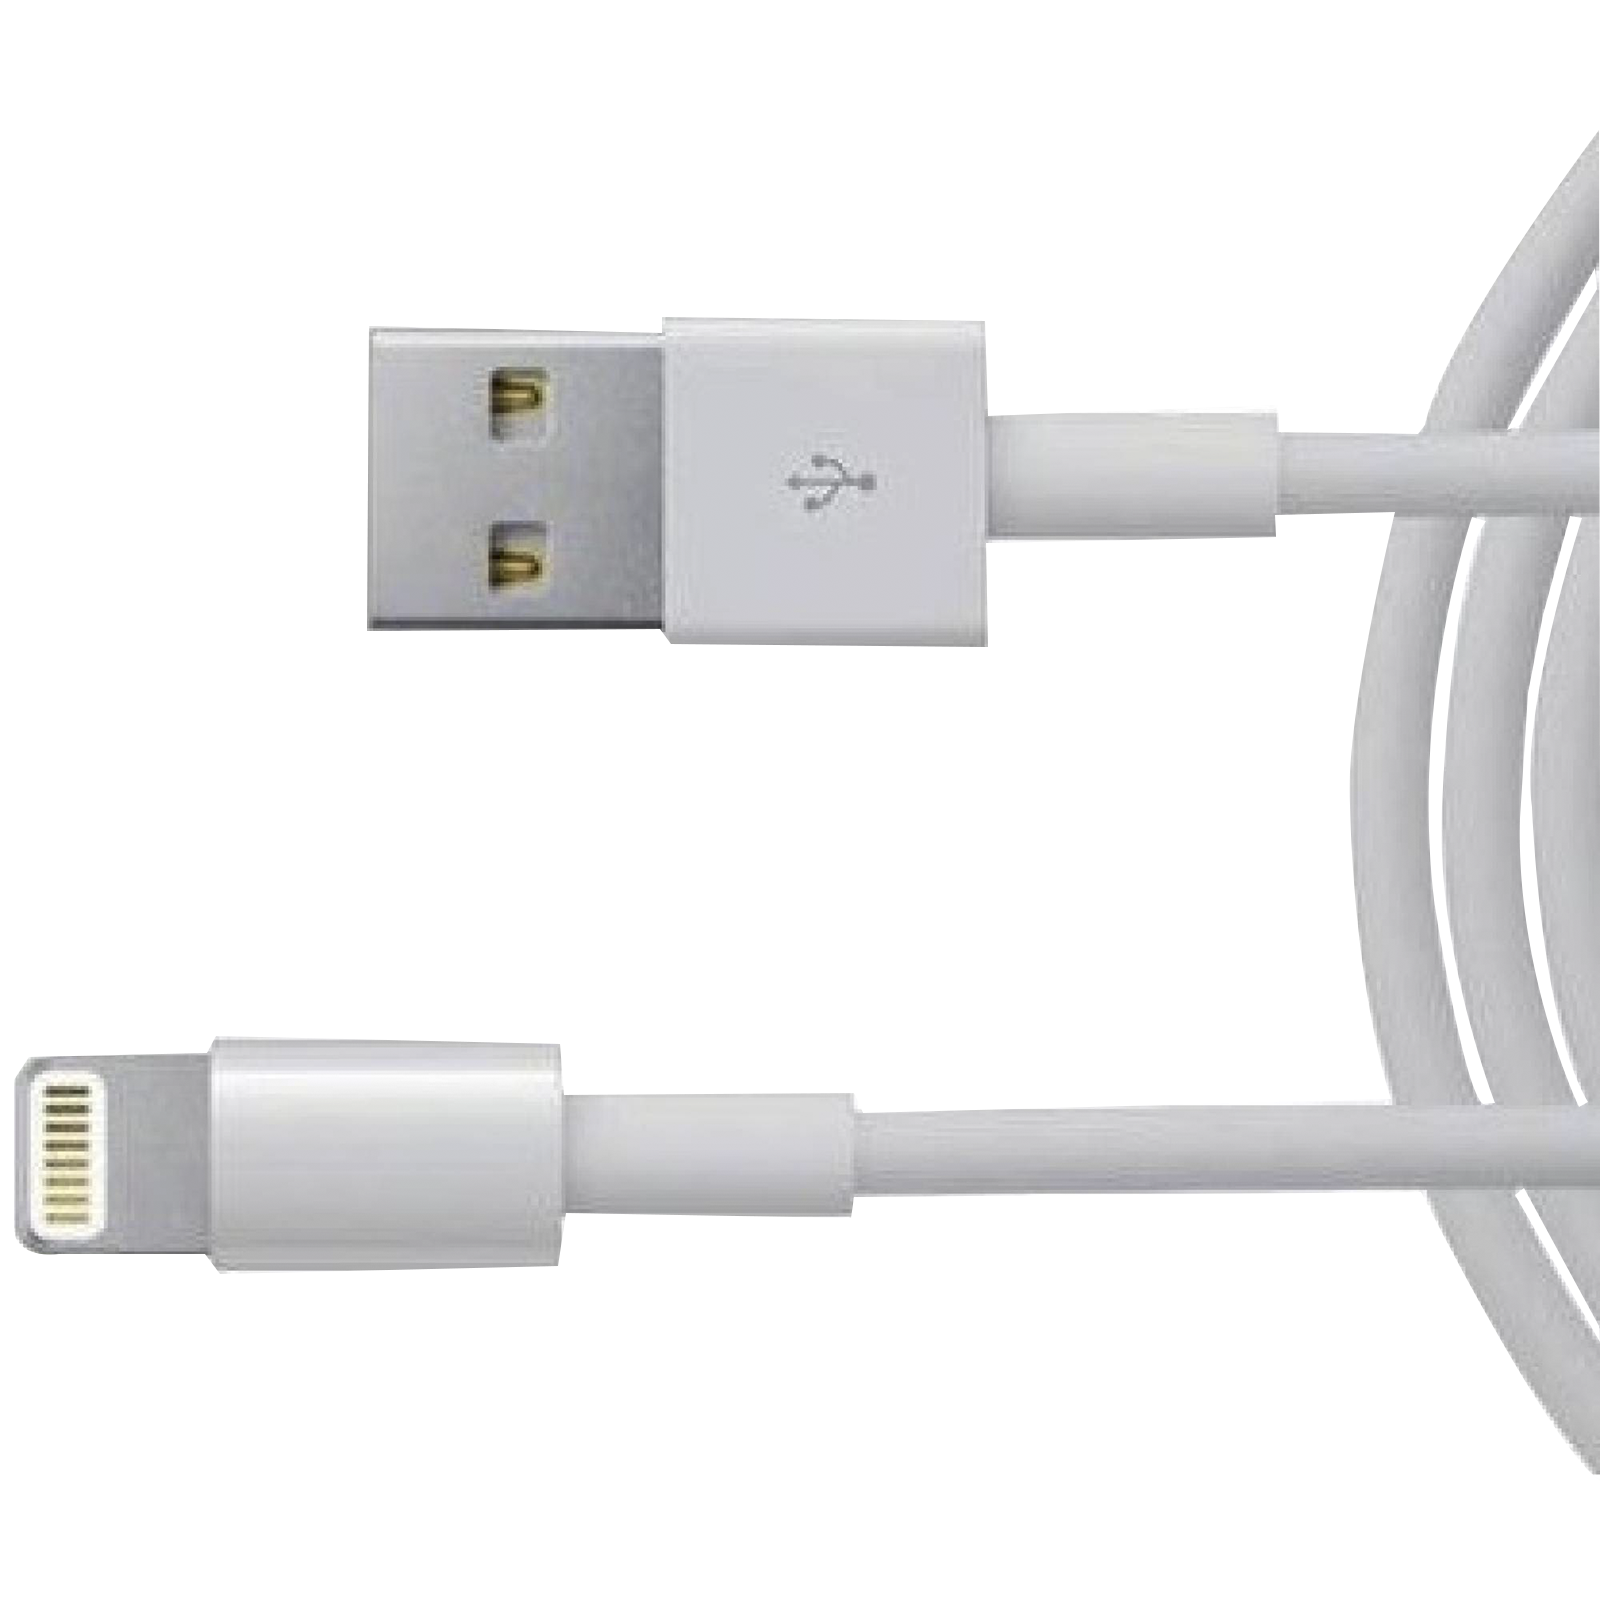 Apple Type A to Lightning 3.3 Feet (1M) Cable (Sync and Charge, White)_1